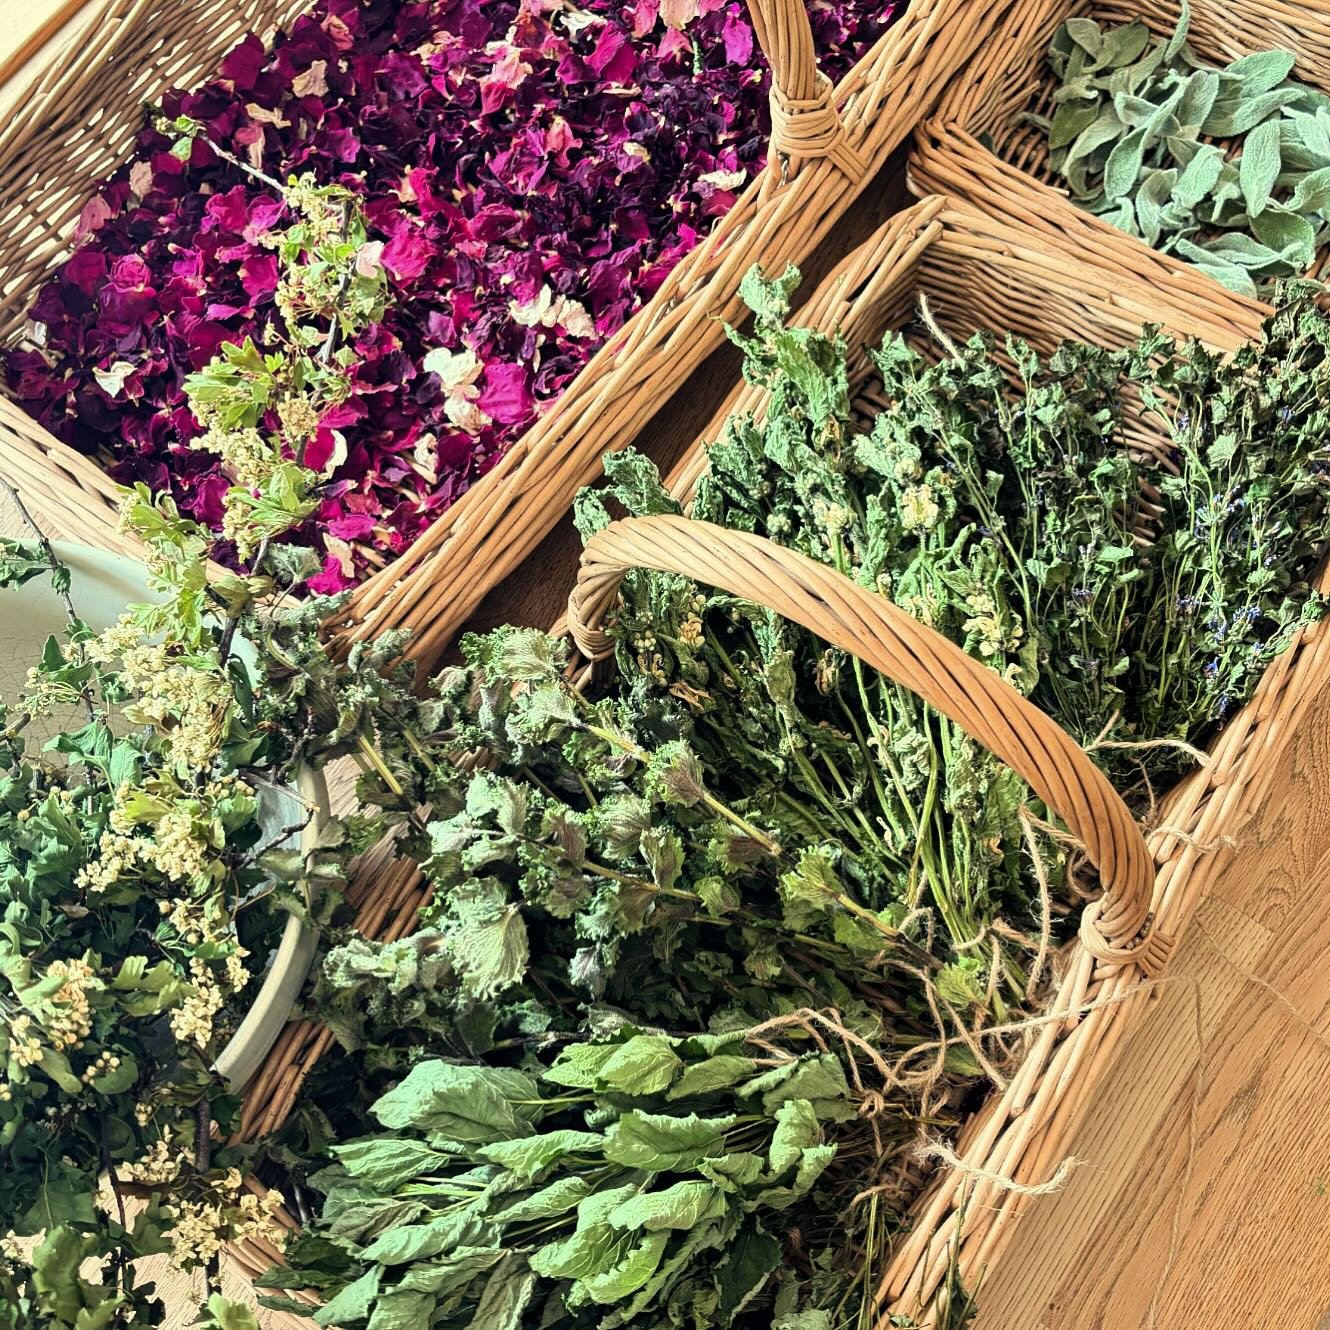 A flurry of herbs for tonight&rsquo;s wall hanging workshop! 🌿
Are you coming along? 
It&rsquo;s not too late if you have a last minute urge to herbal! 😆

https://thehoneybeesanctuary.org/shop/p/may-herbal-workshops